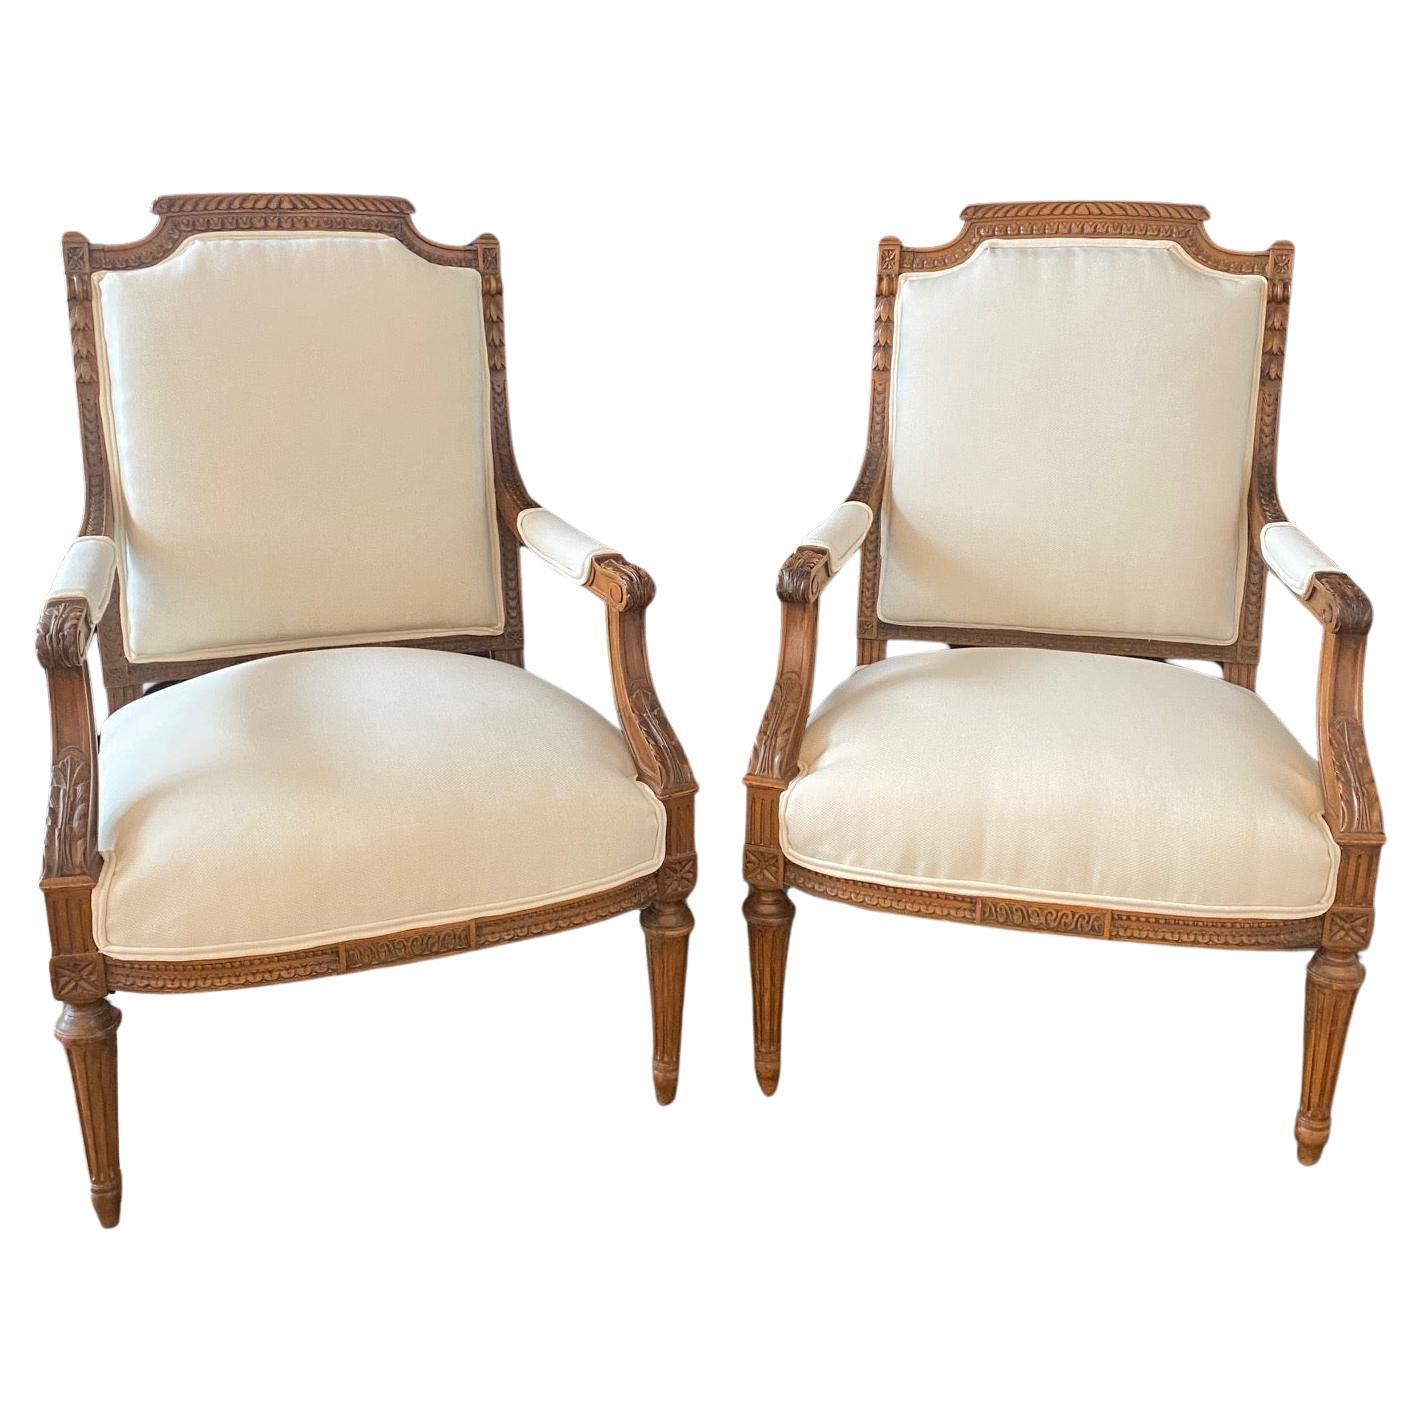 Pair of Antique French 19th Century Neoclassical Louis XVI Carved Armchairs For Sale